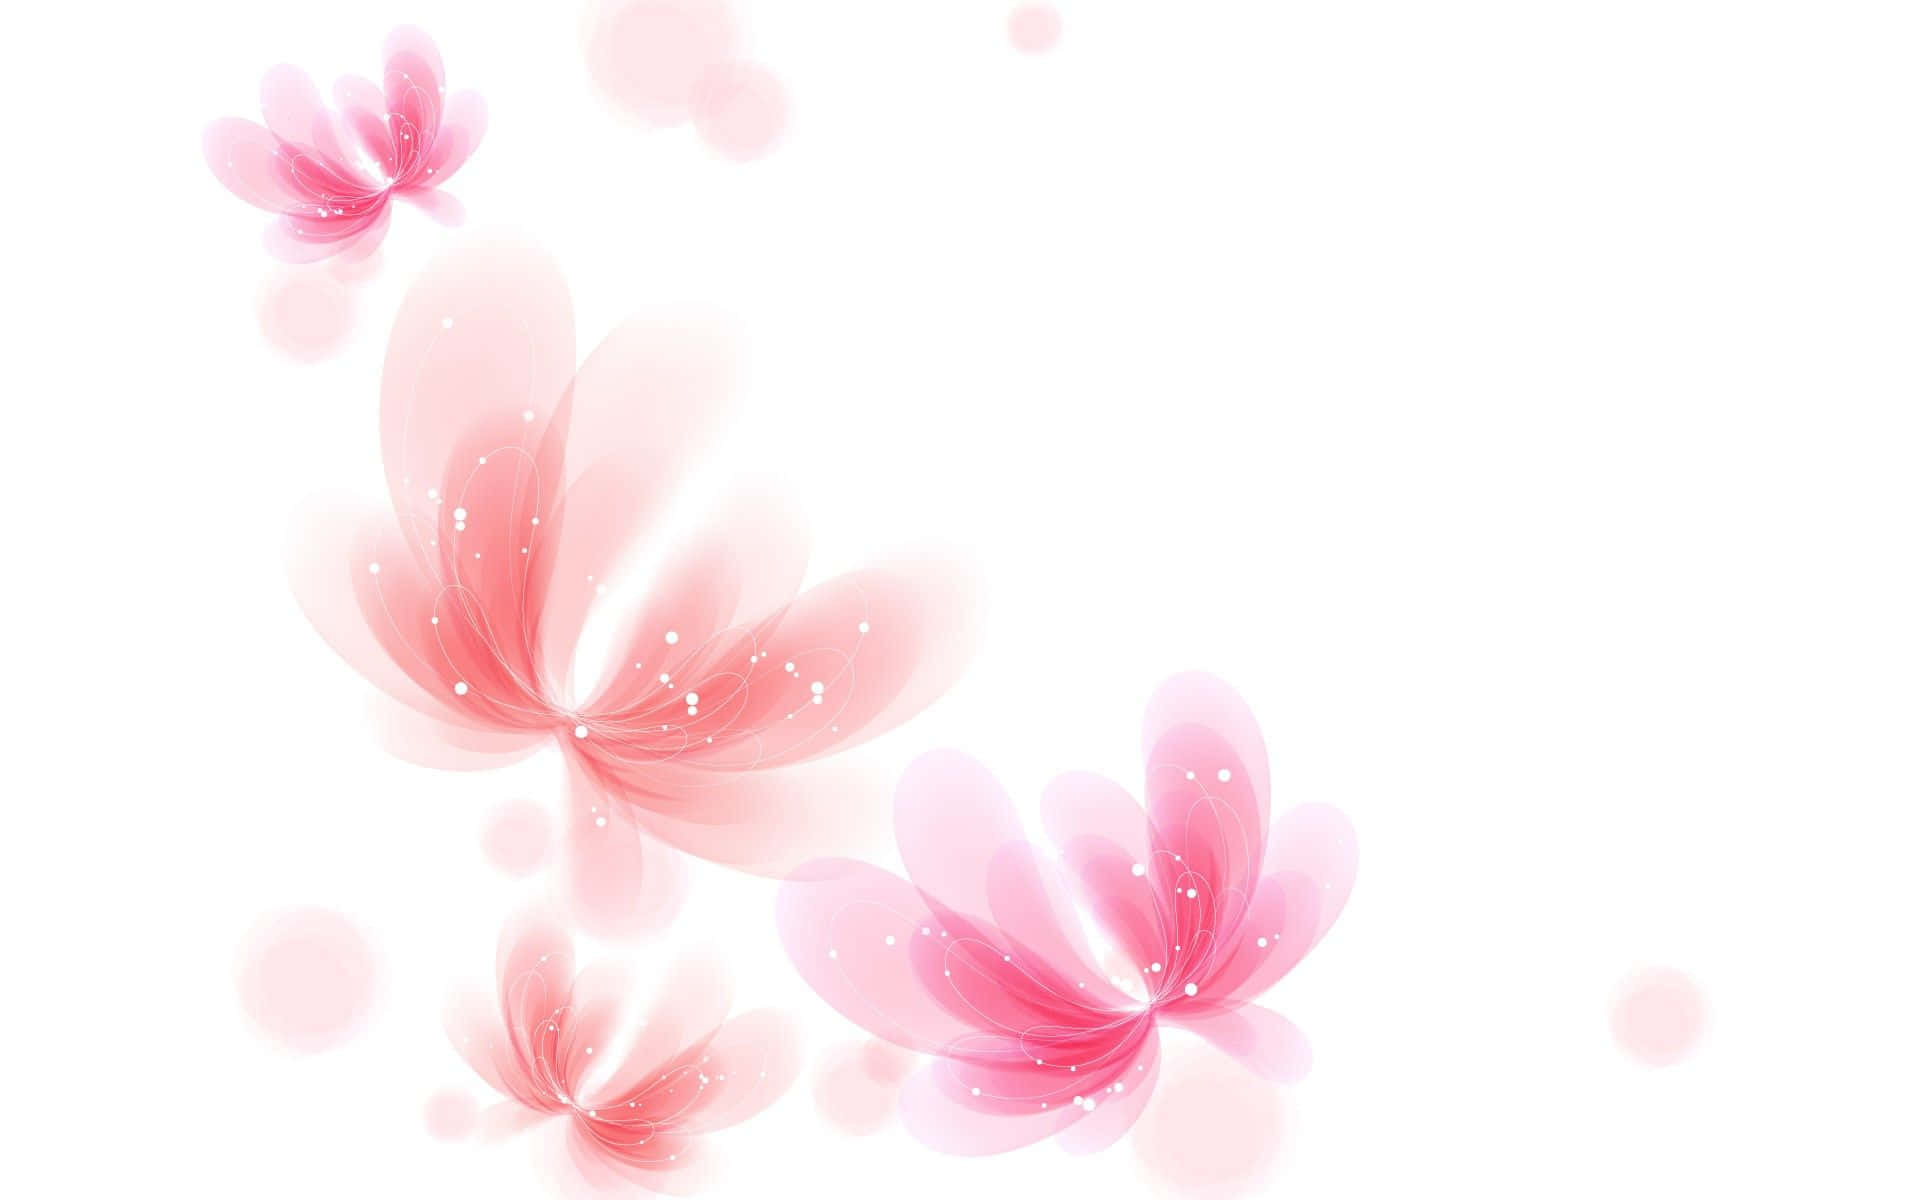 An aesthetic illustration with a bright pink and white background Wallpaper